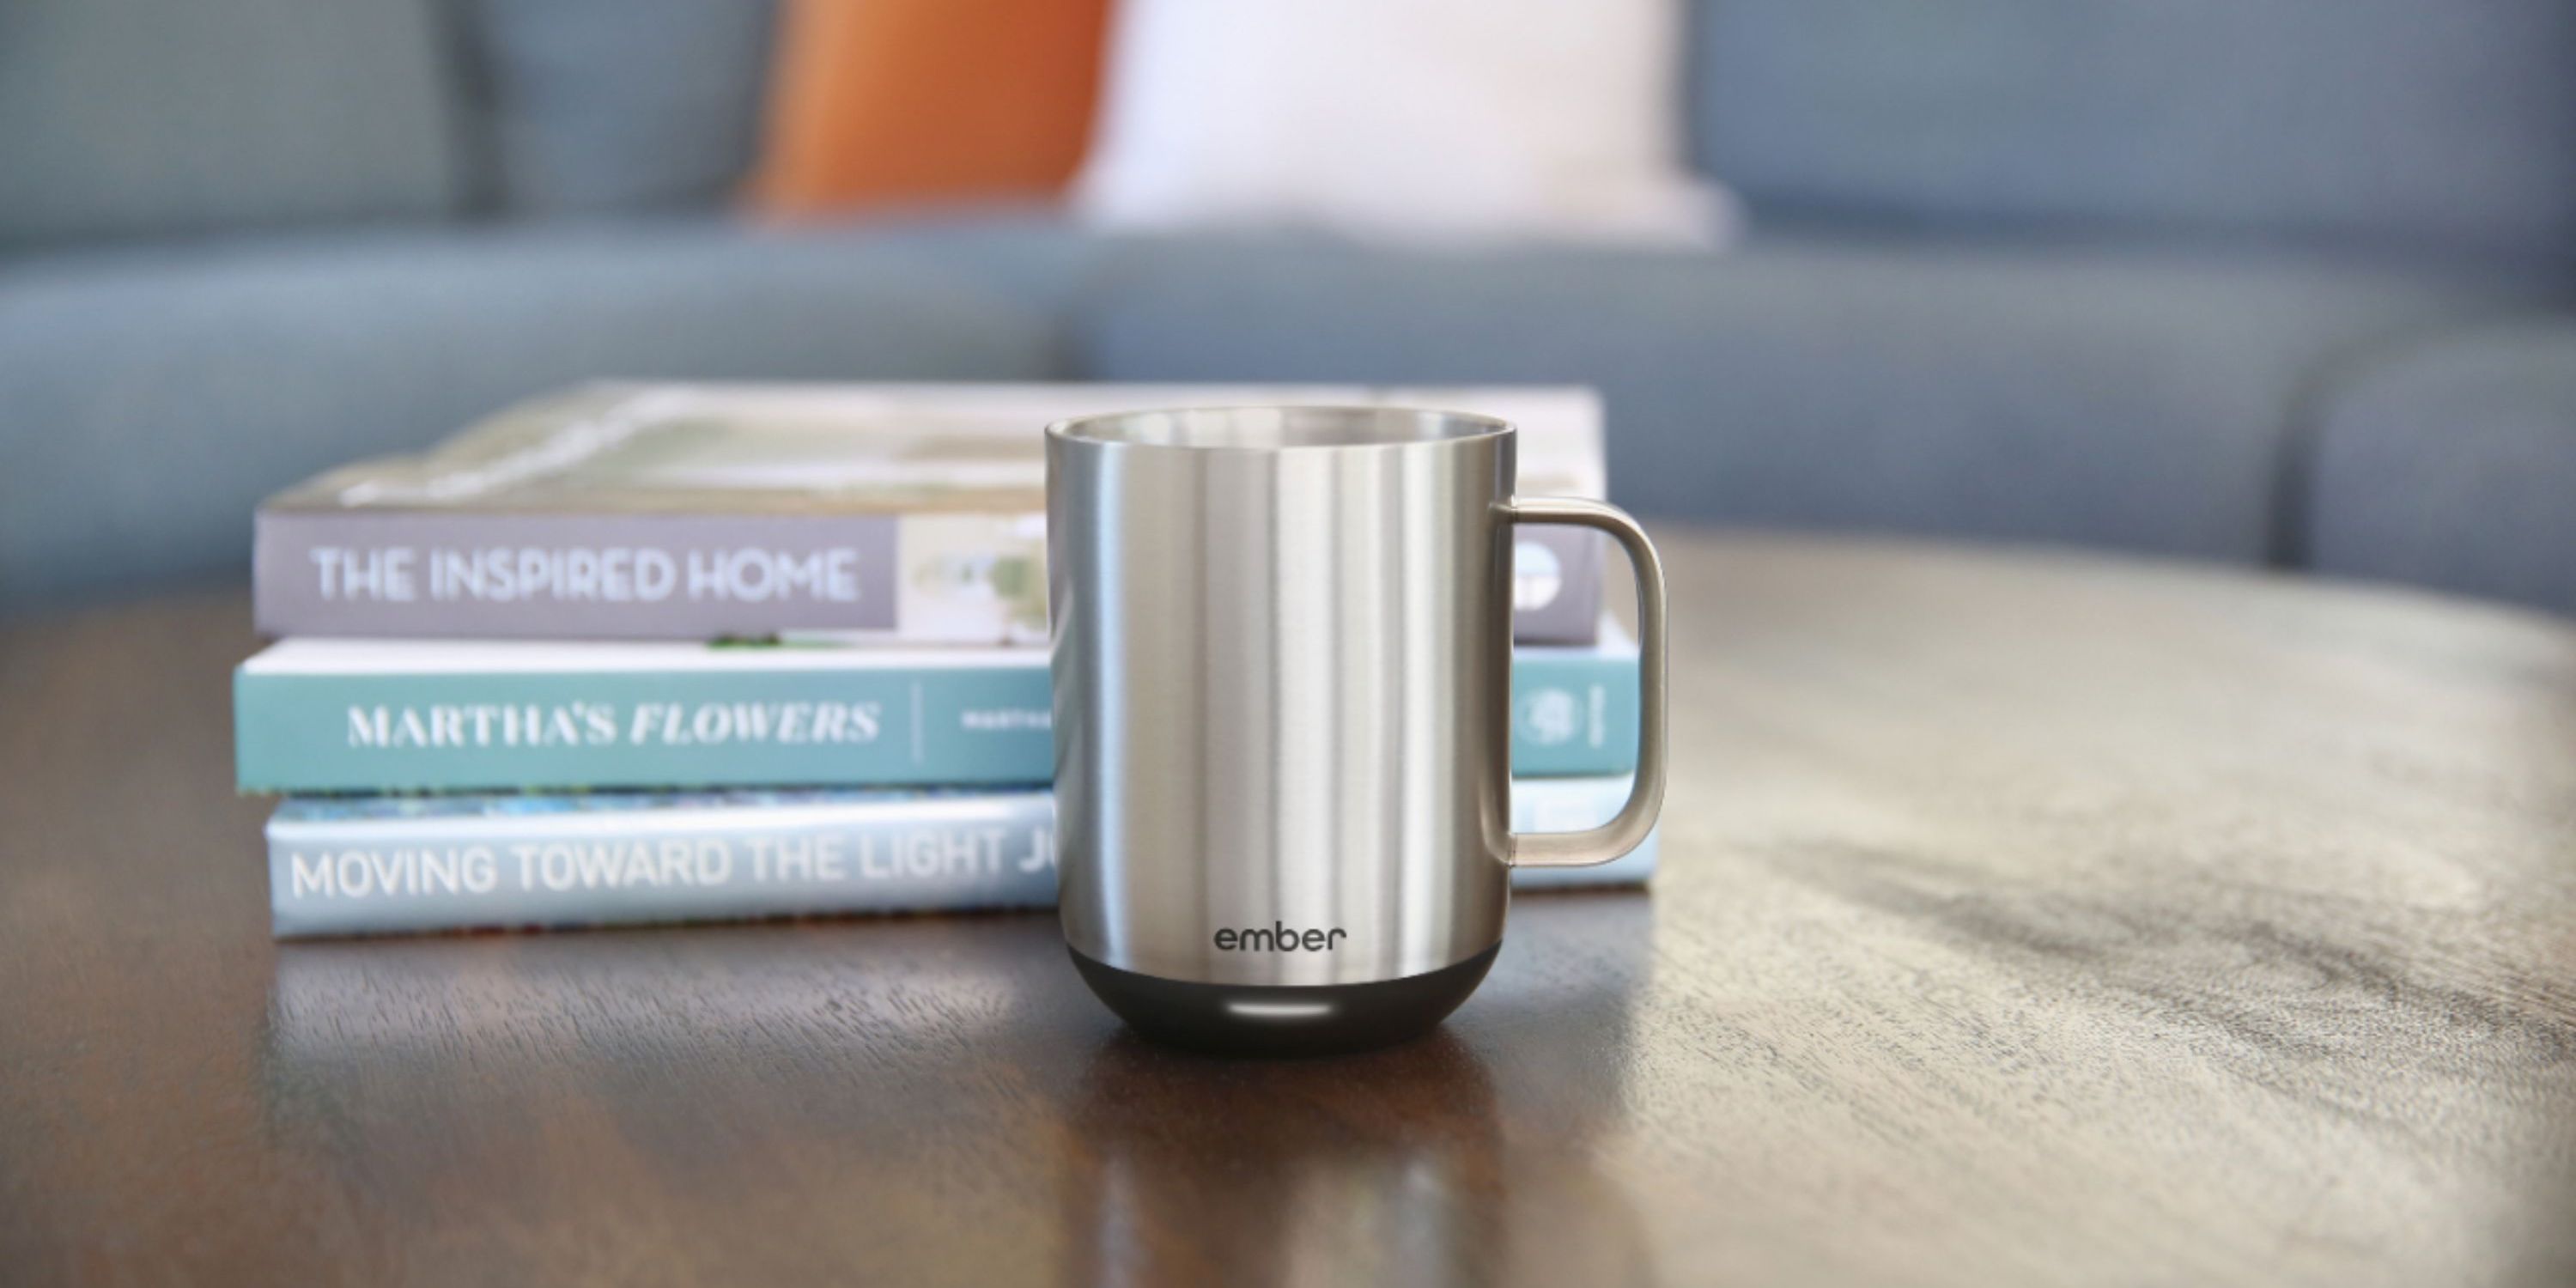 2 in 1 Smart Coffee Mug Warmer with Wireless Charger - Brilliant Promos -  Be Brilliant!